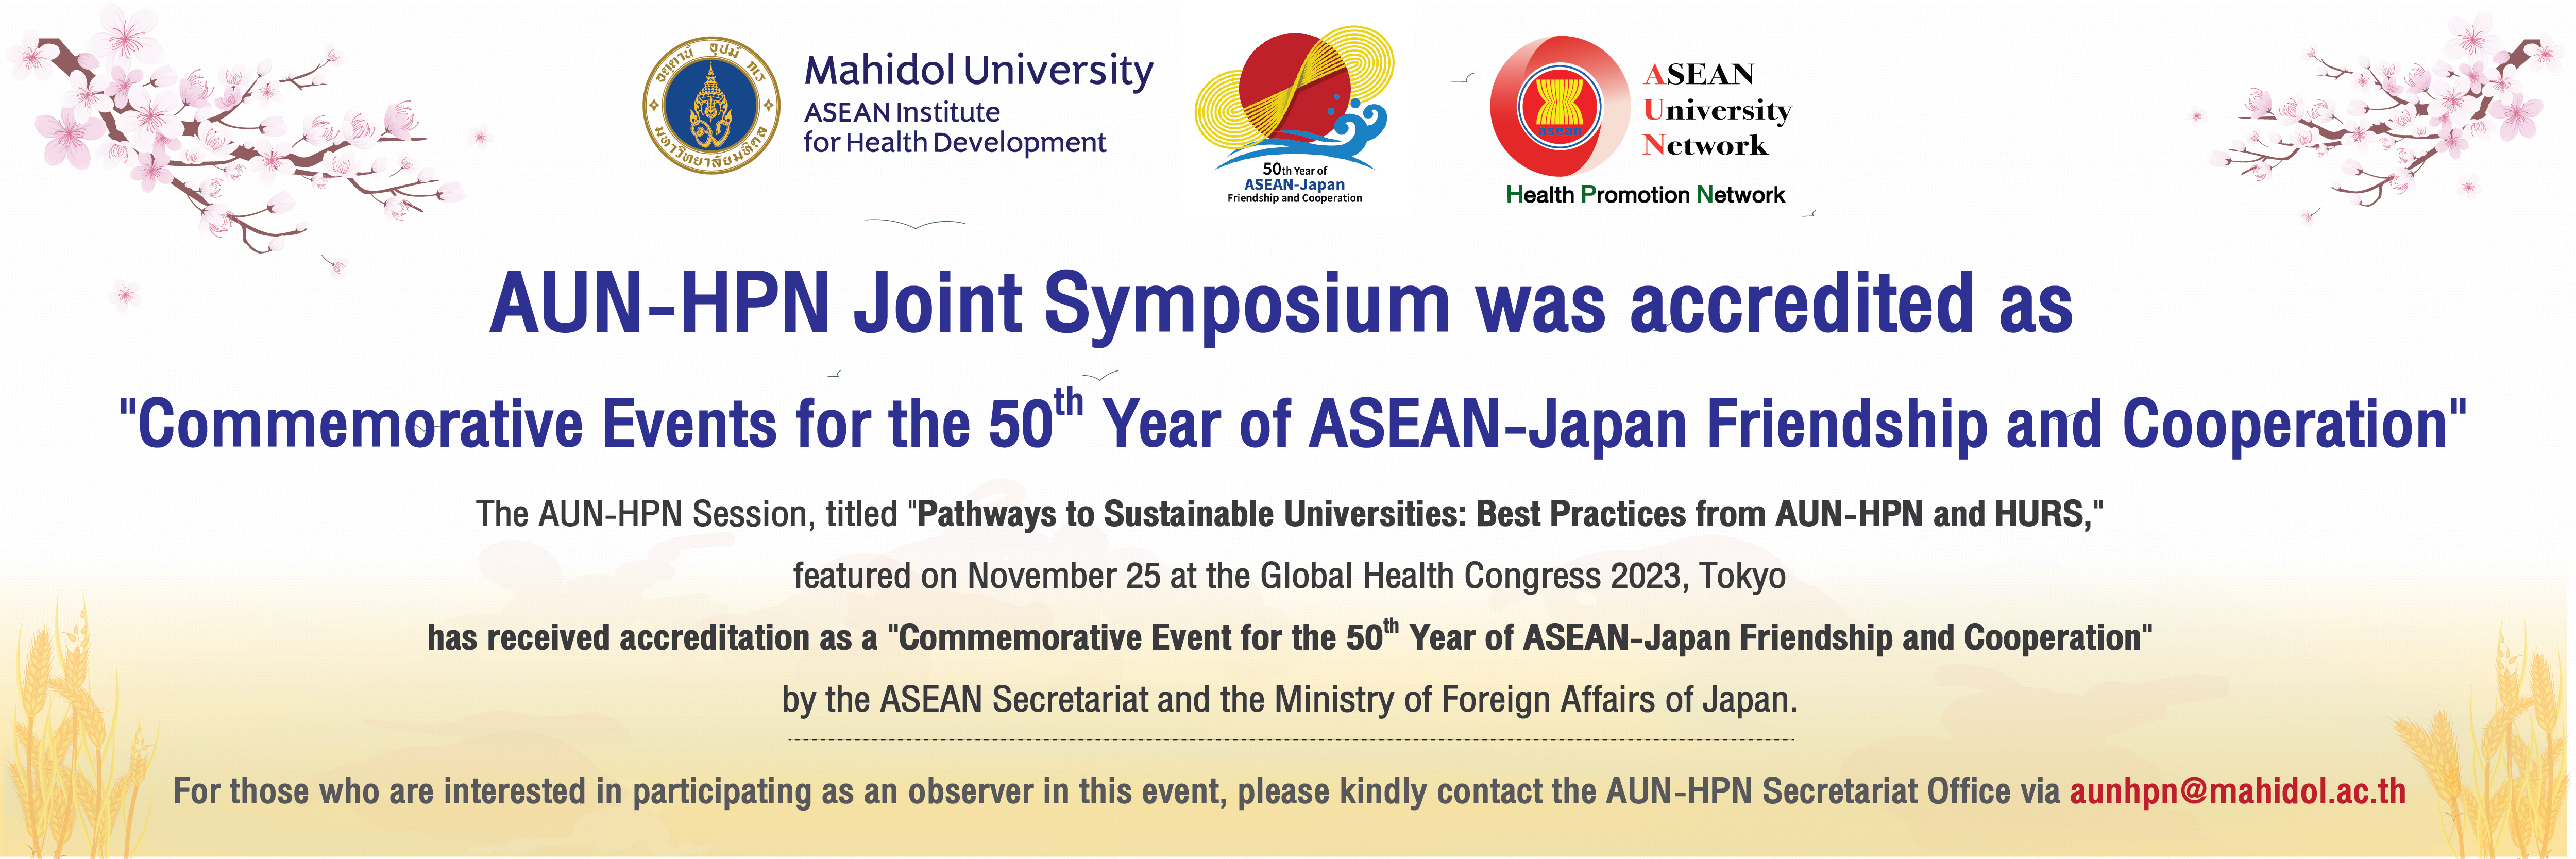 Accreditation for the upcoming AUN-HPN Joint Symposium 